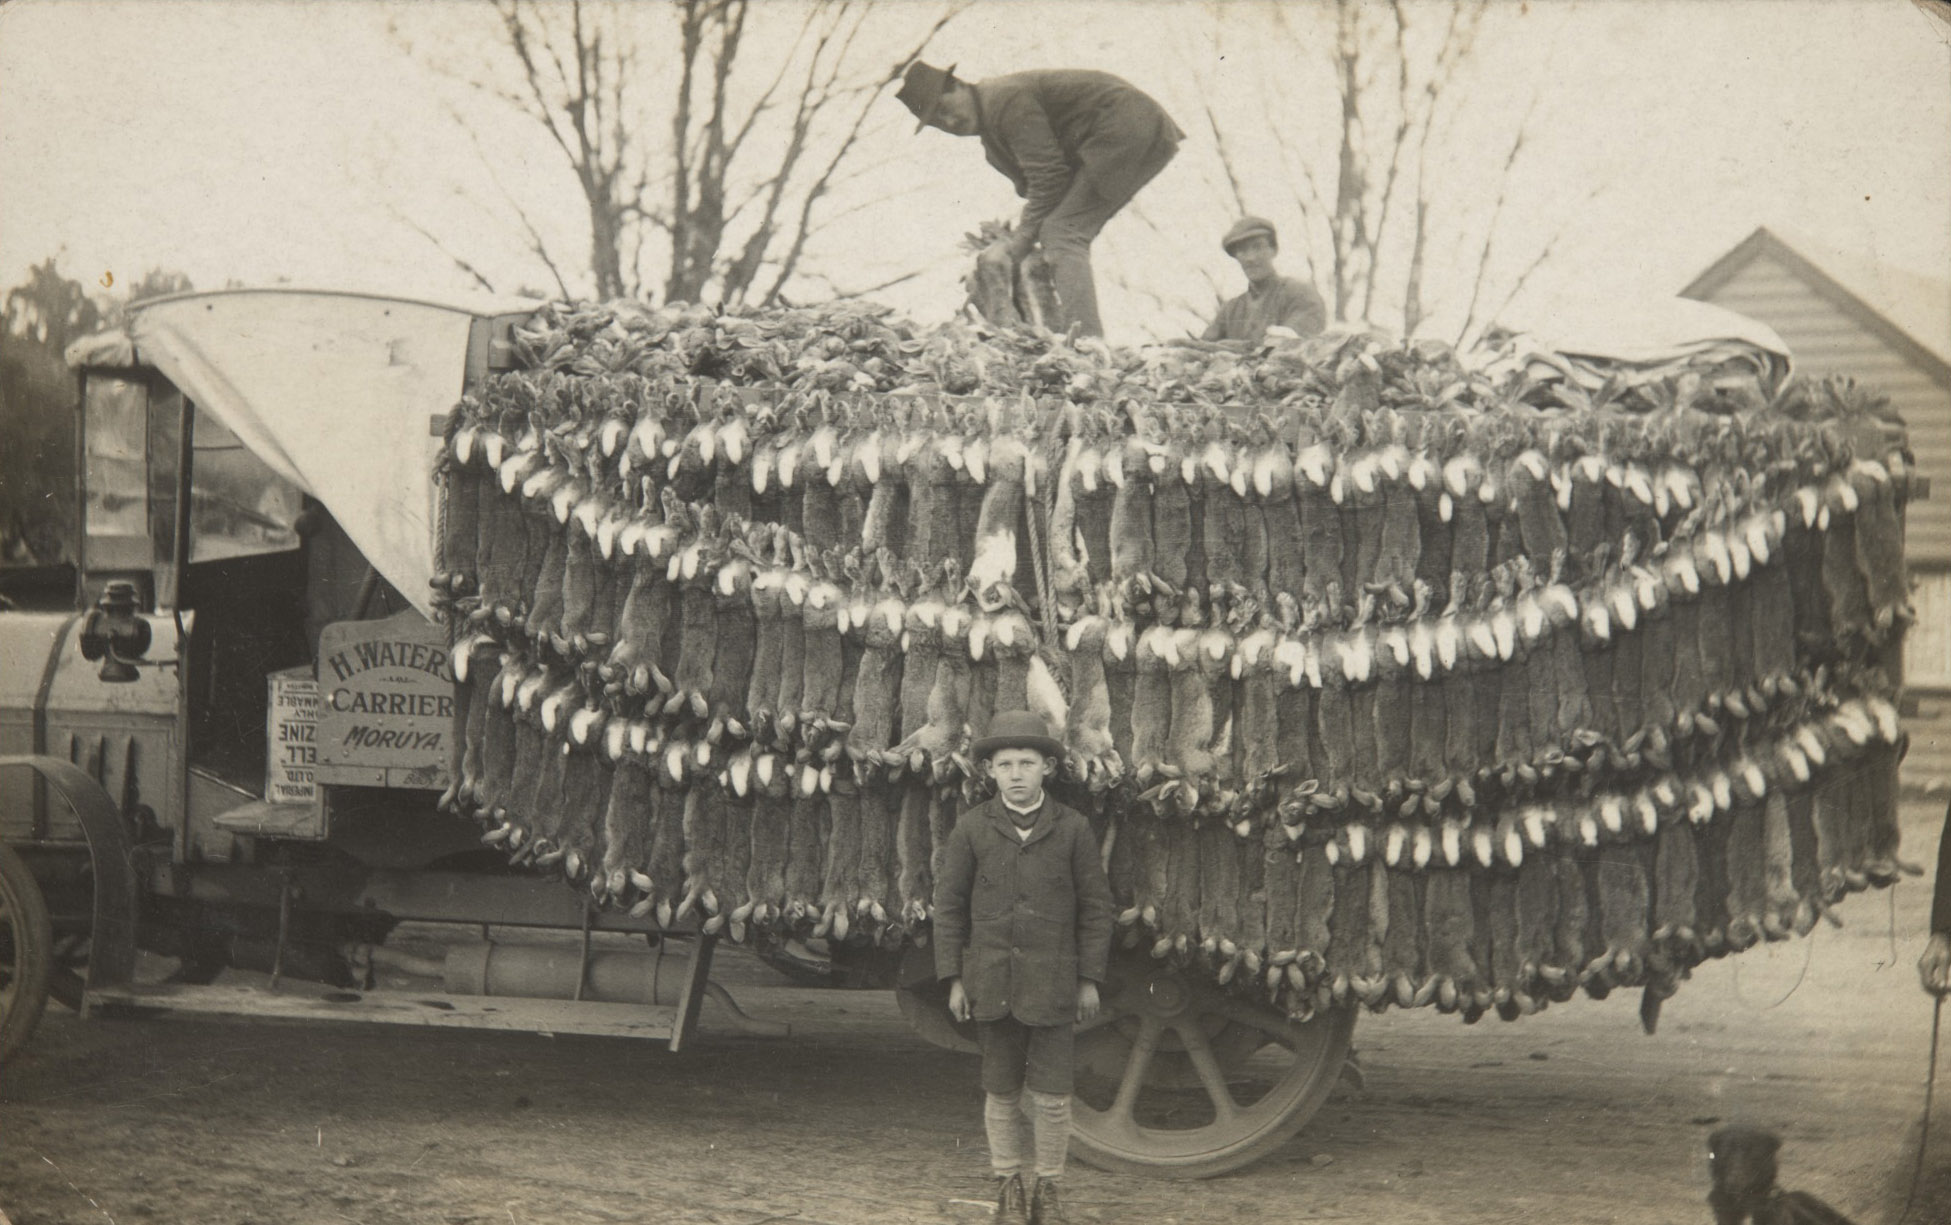 <p>Lorry load of rabbits, Braidwood, NSW, photographed by Paul C. Nomchong</p>
